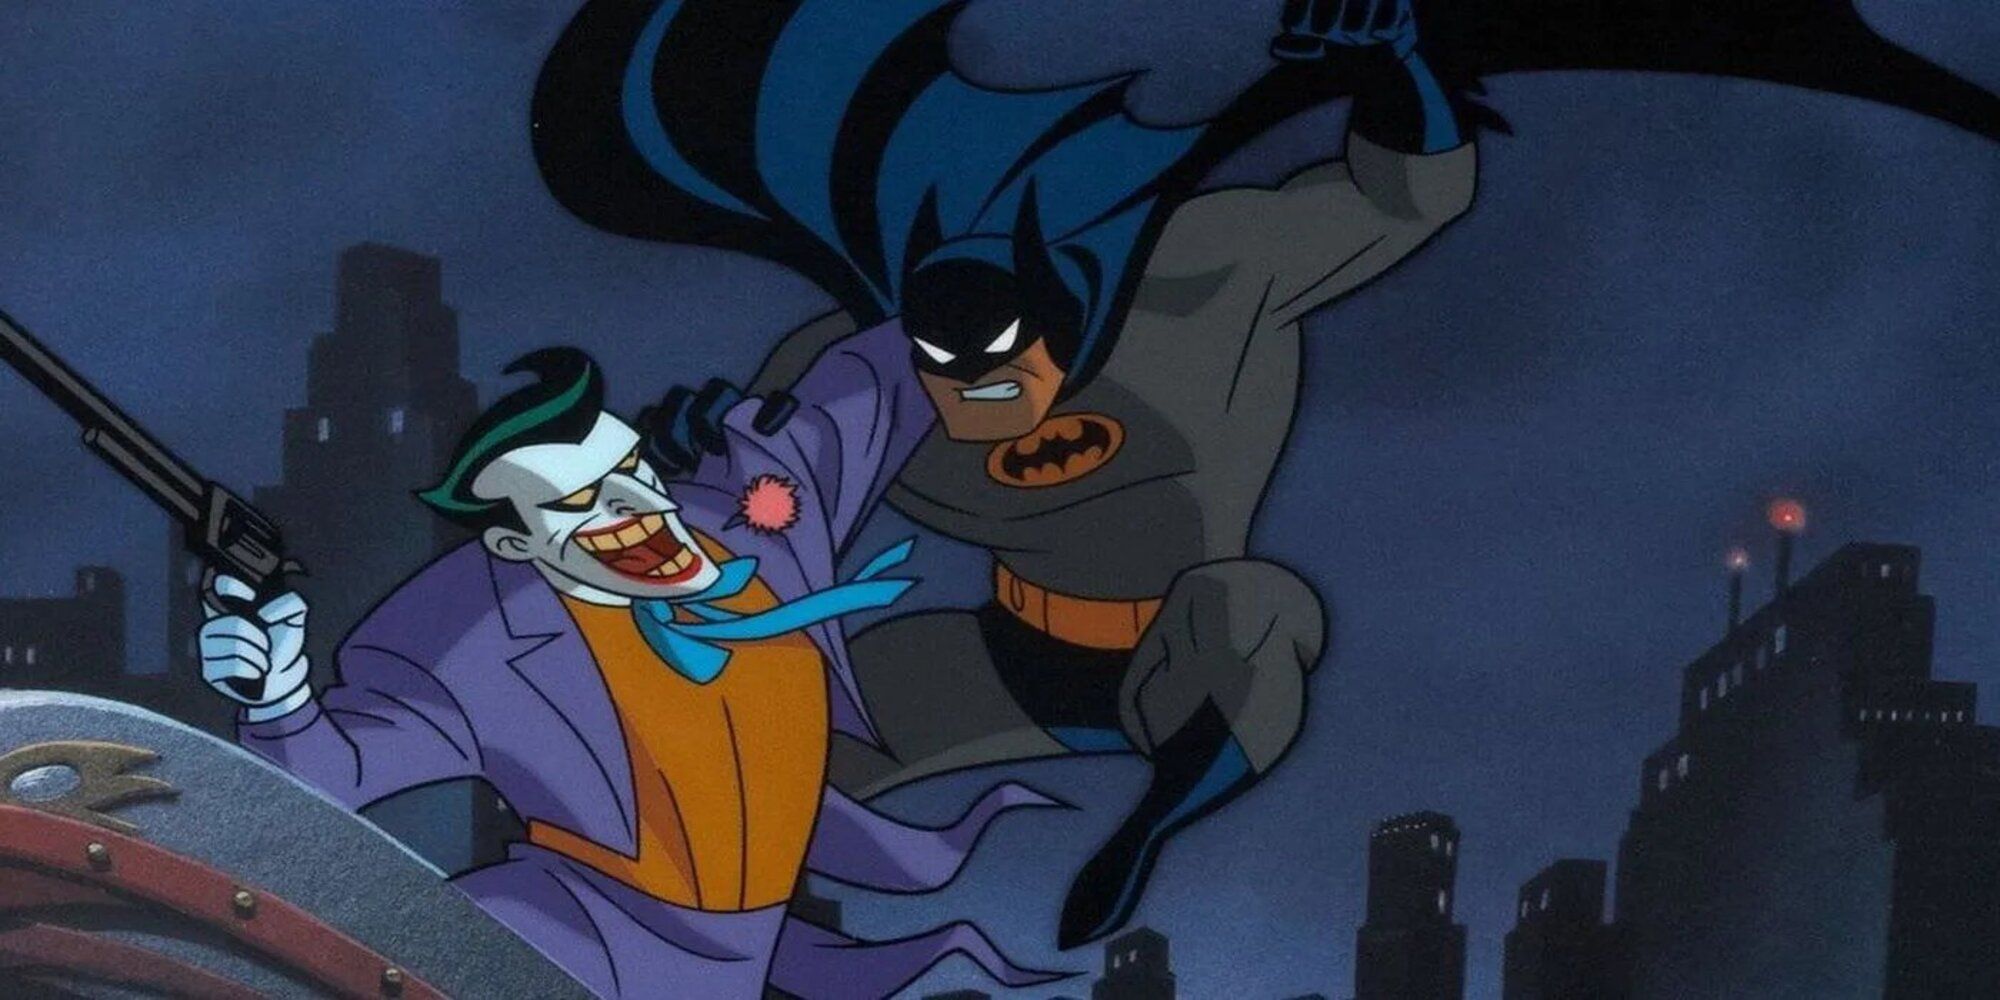 Batman and Joker fighting on a rooftop in Batman: The Animated Series